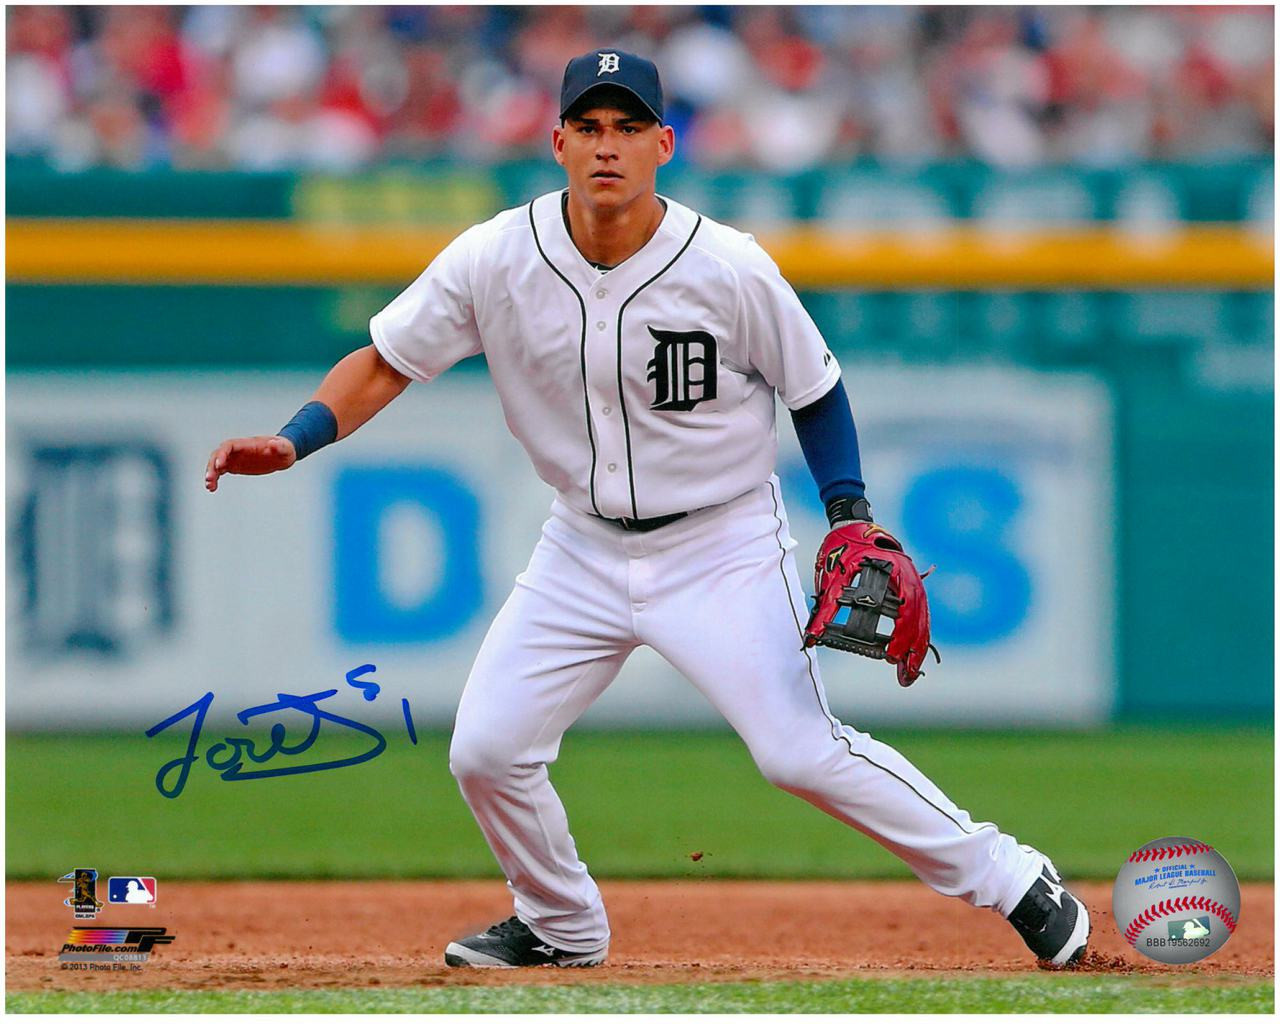 Jose Iglesias Autographed Detroit Tigers 8x10 Photo #1 - Ready for Action